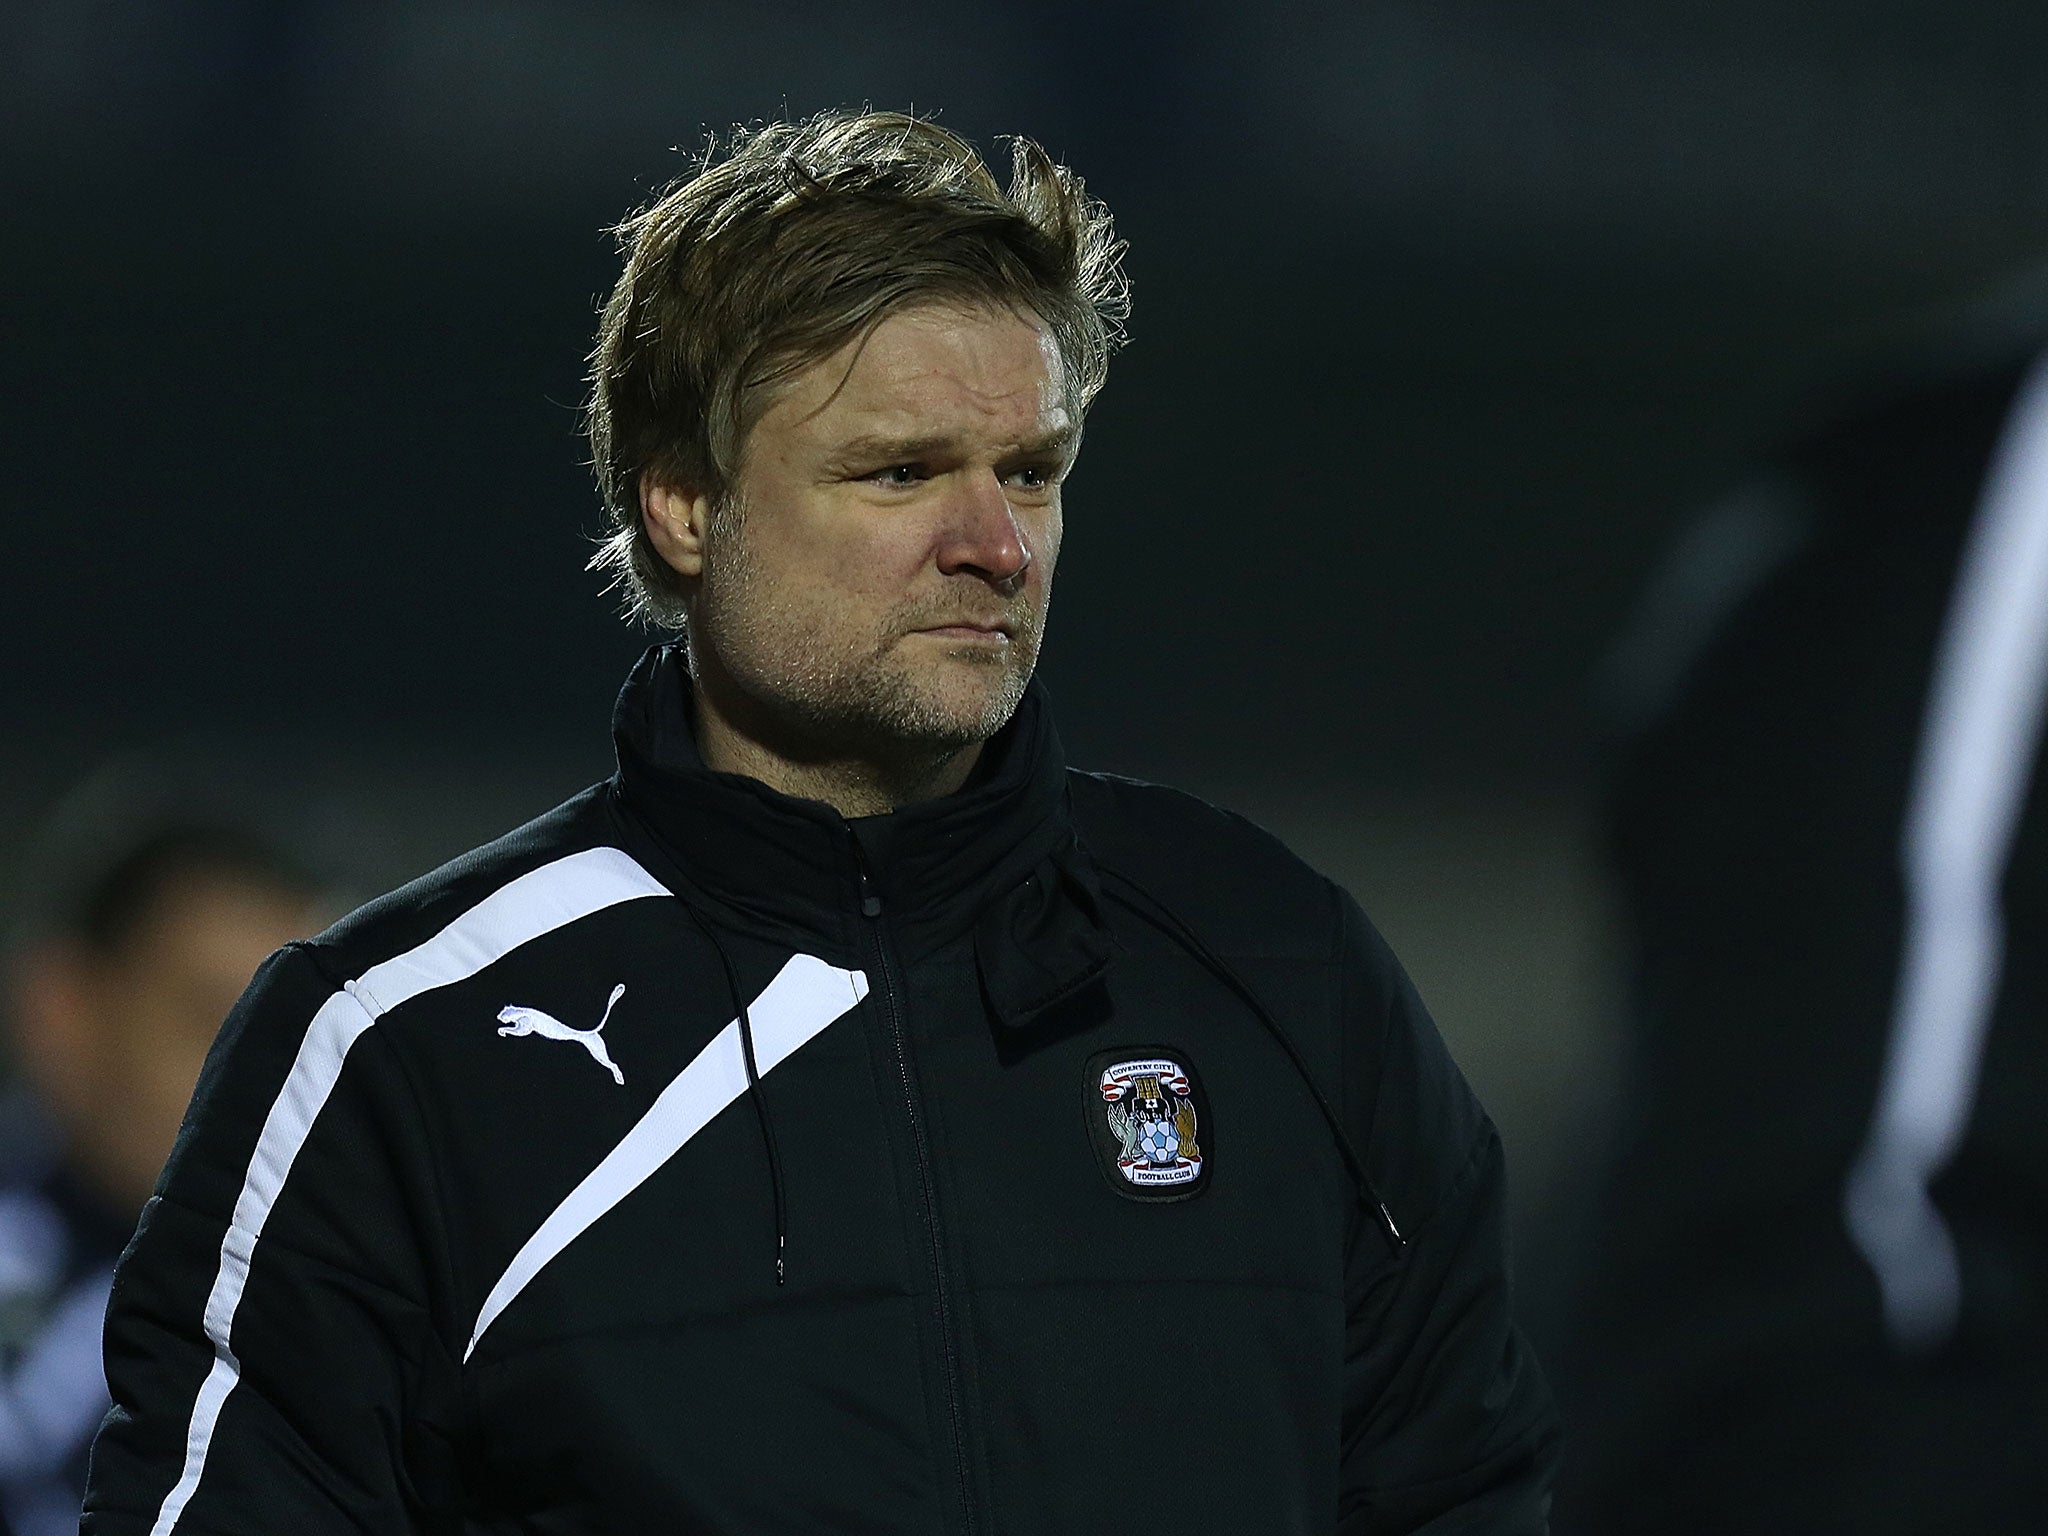 Manager Steven Pressley, who did well to keep Coventry up, hailed the decision as a ‘huge and defining day for the club’